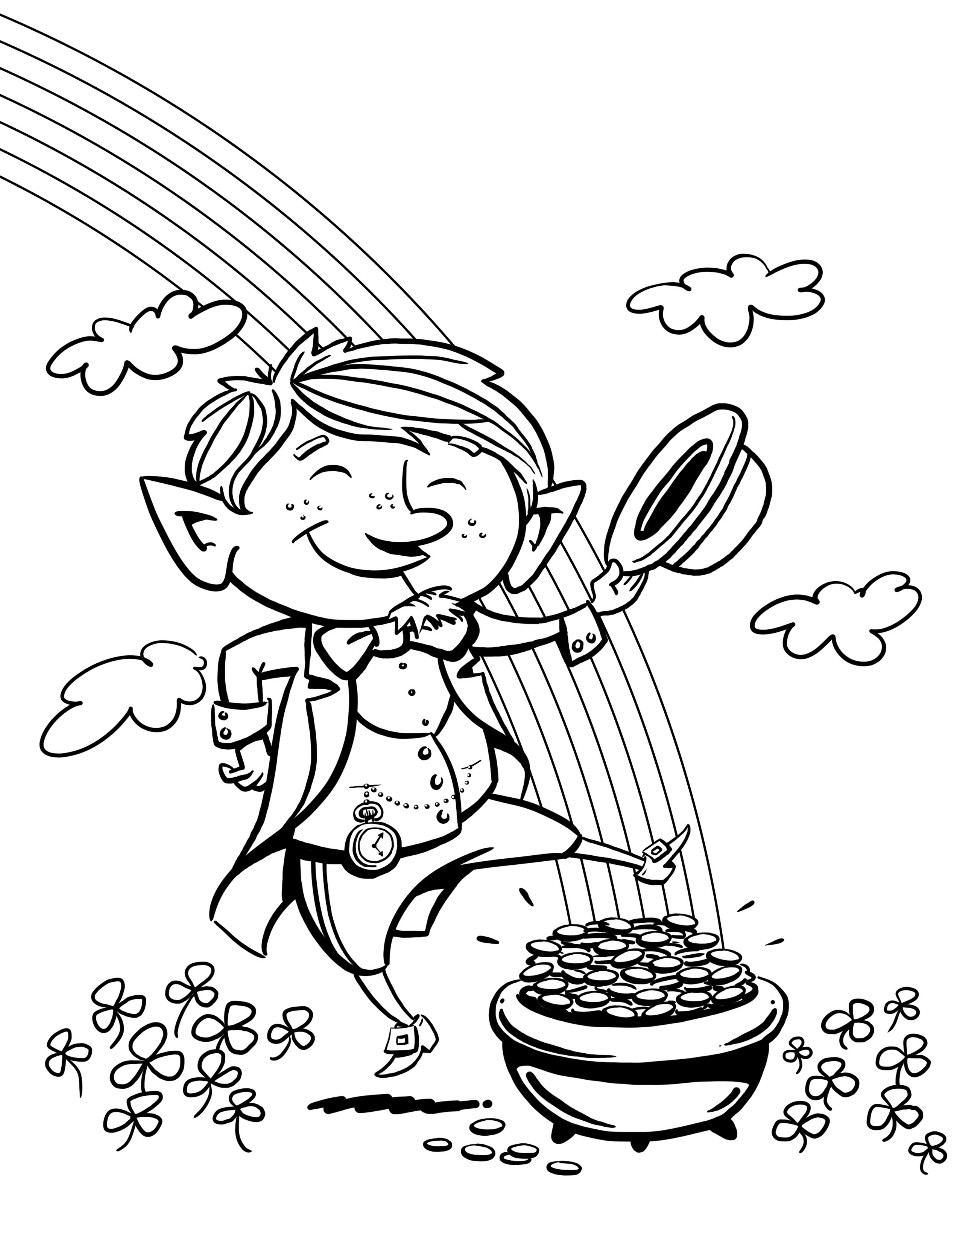 Leprechaun Coloring Pages
 Leprechaun Coloring Pages Best Coloring Pages For Kids